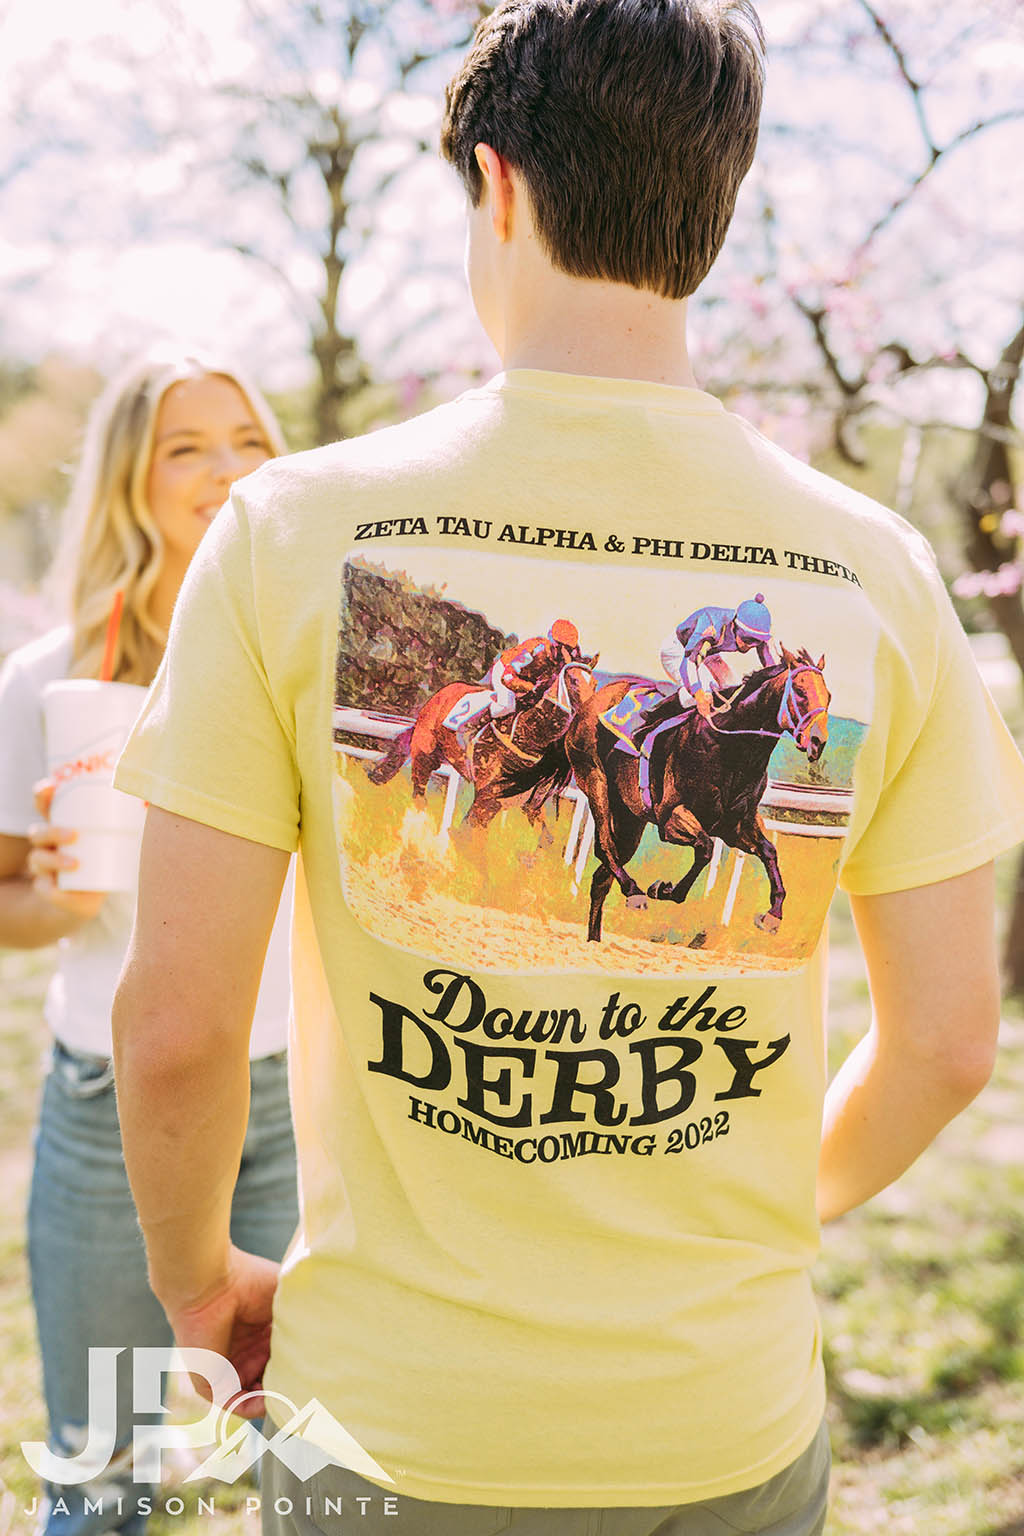 Phi Delta Theta Down to the Derby Homecoming Tshirt